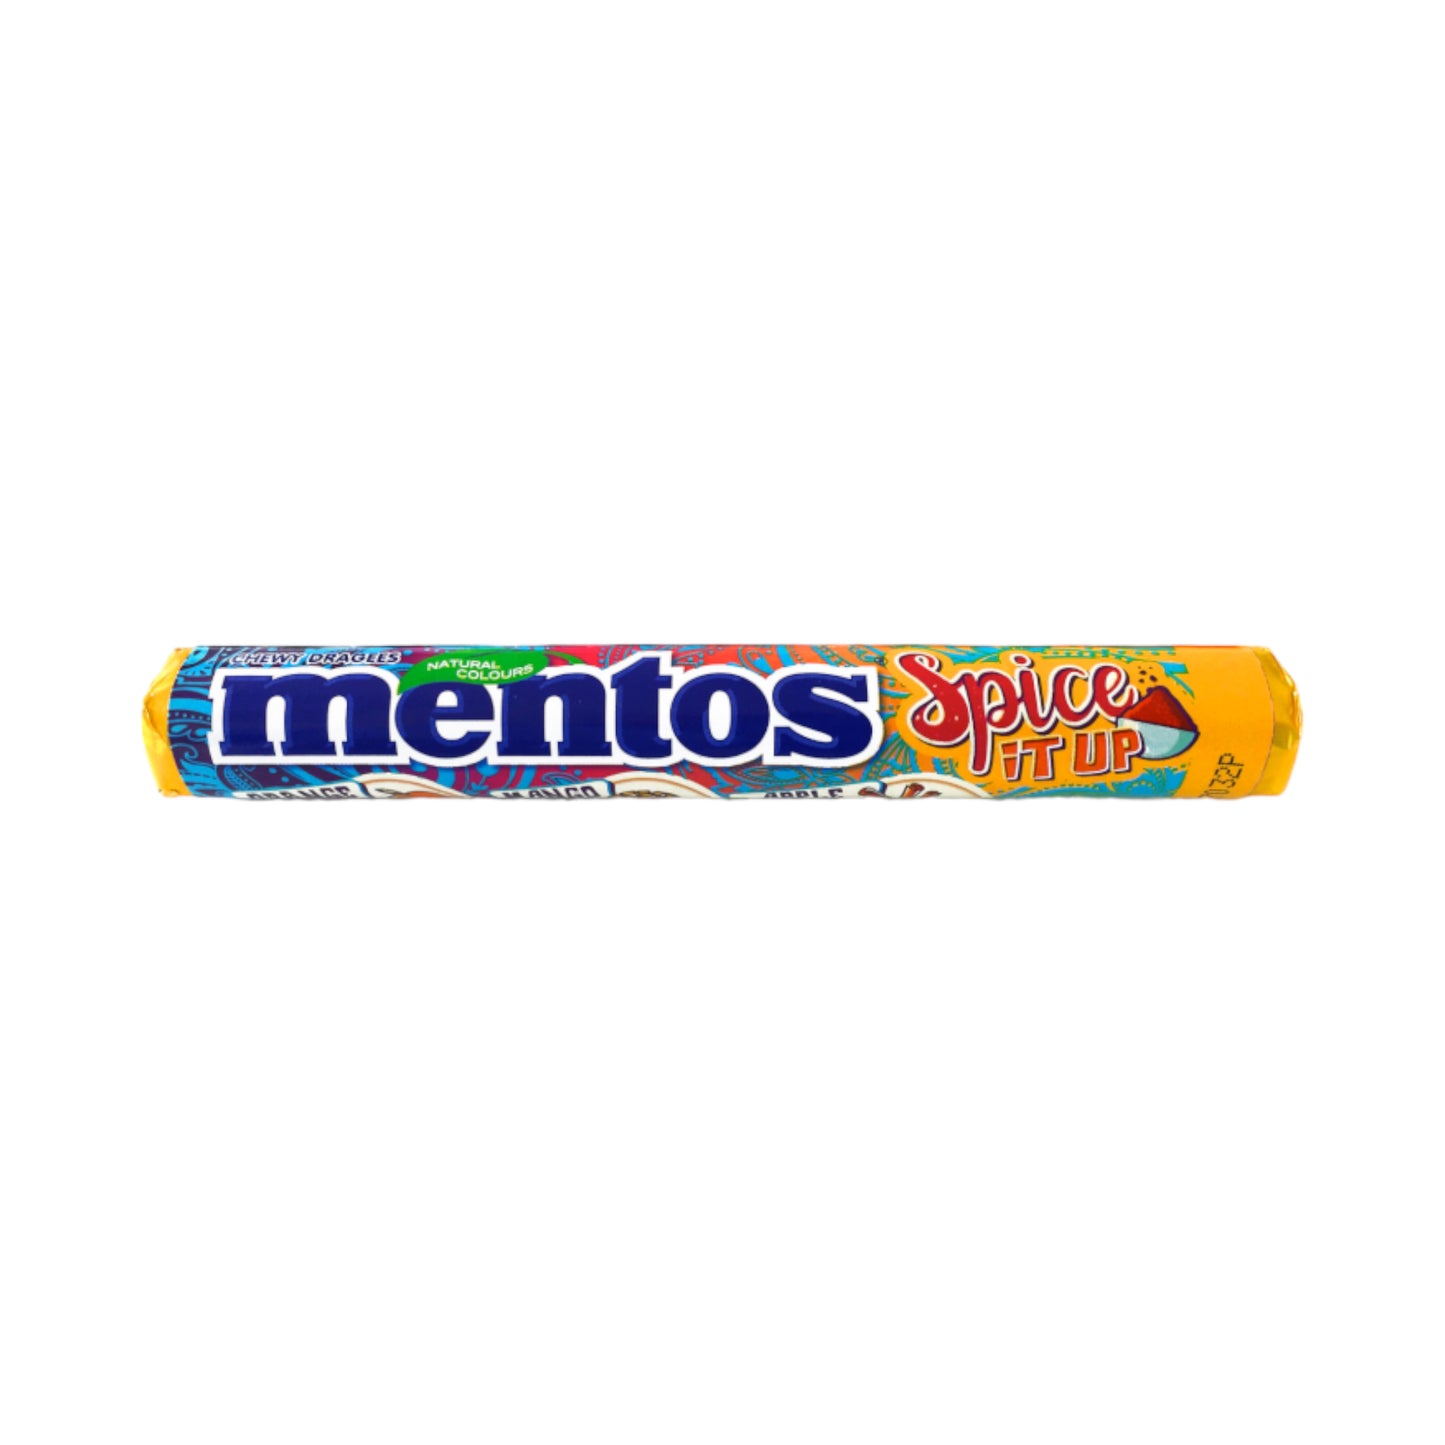 Mentos Roll Spice iT UP - 29.7g